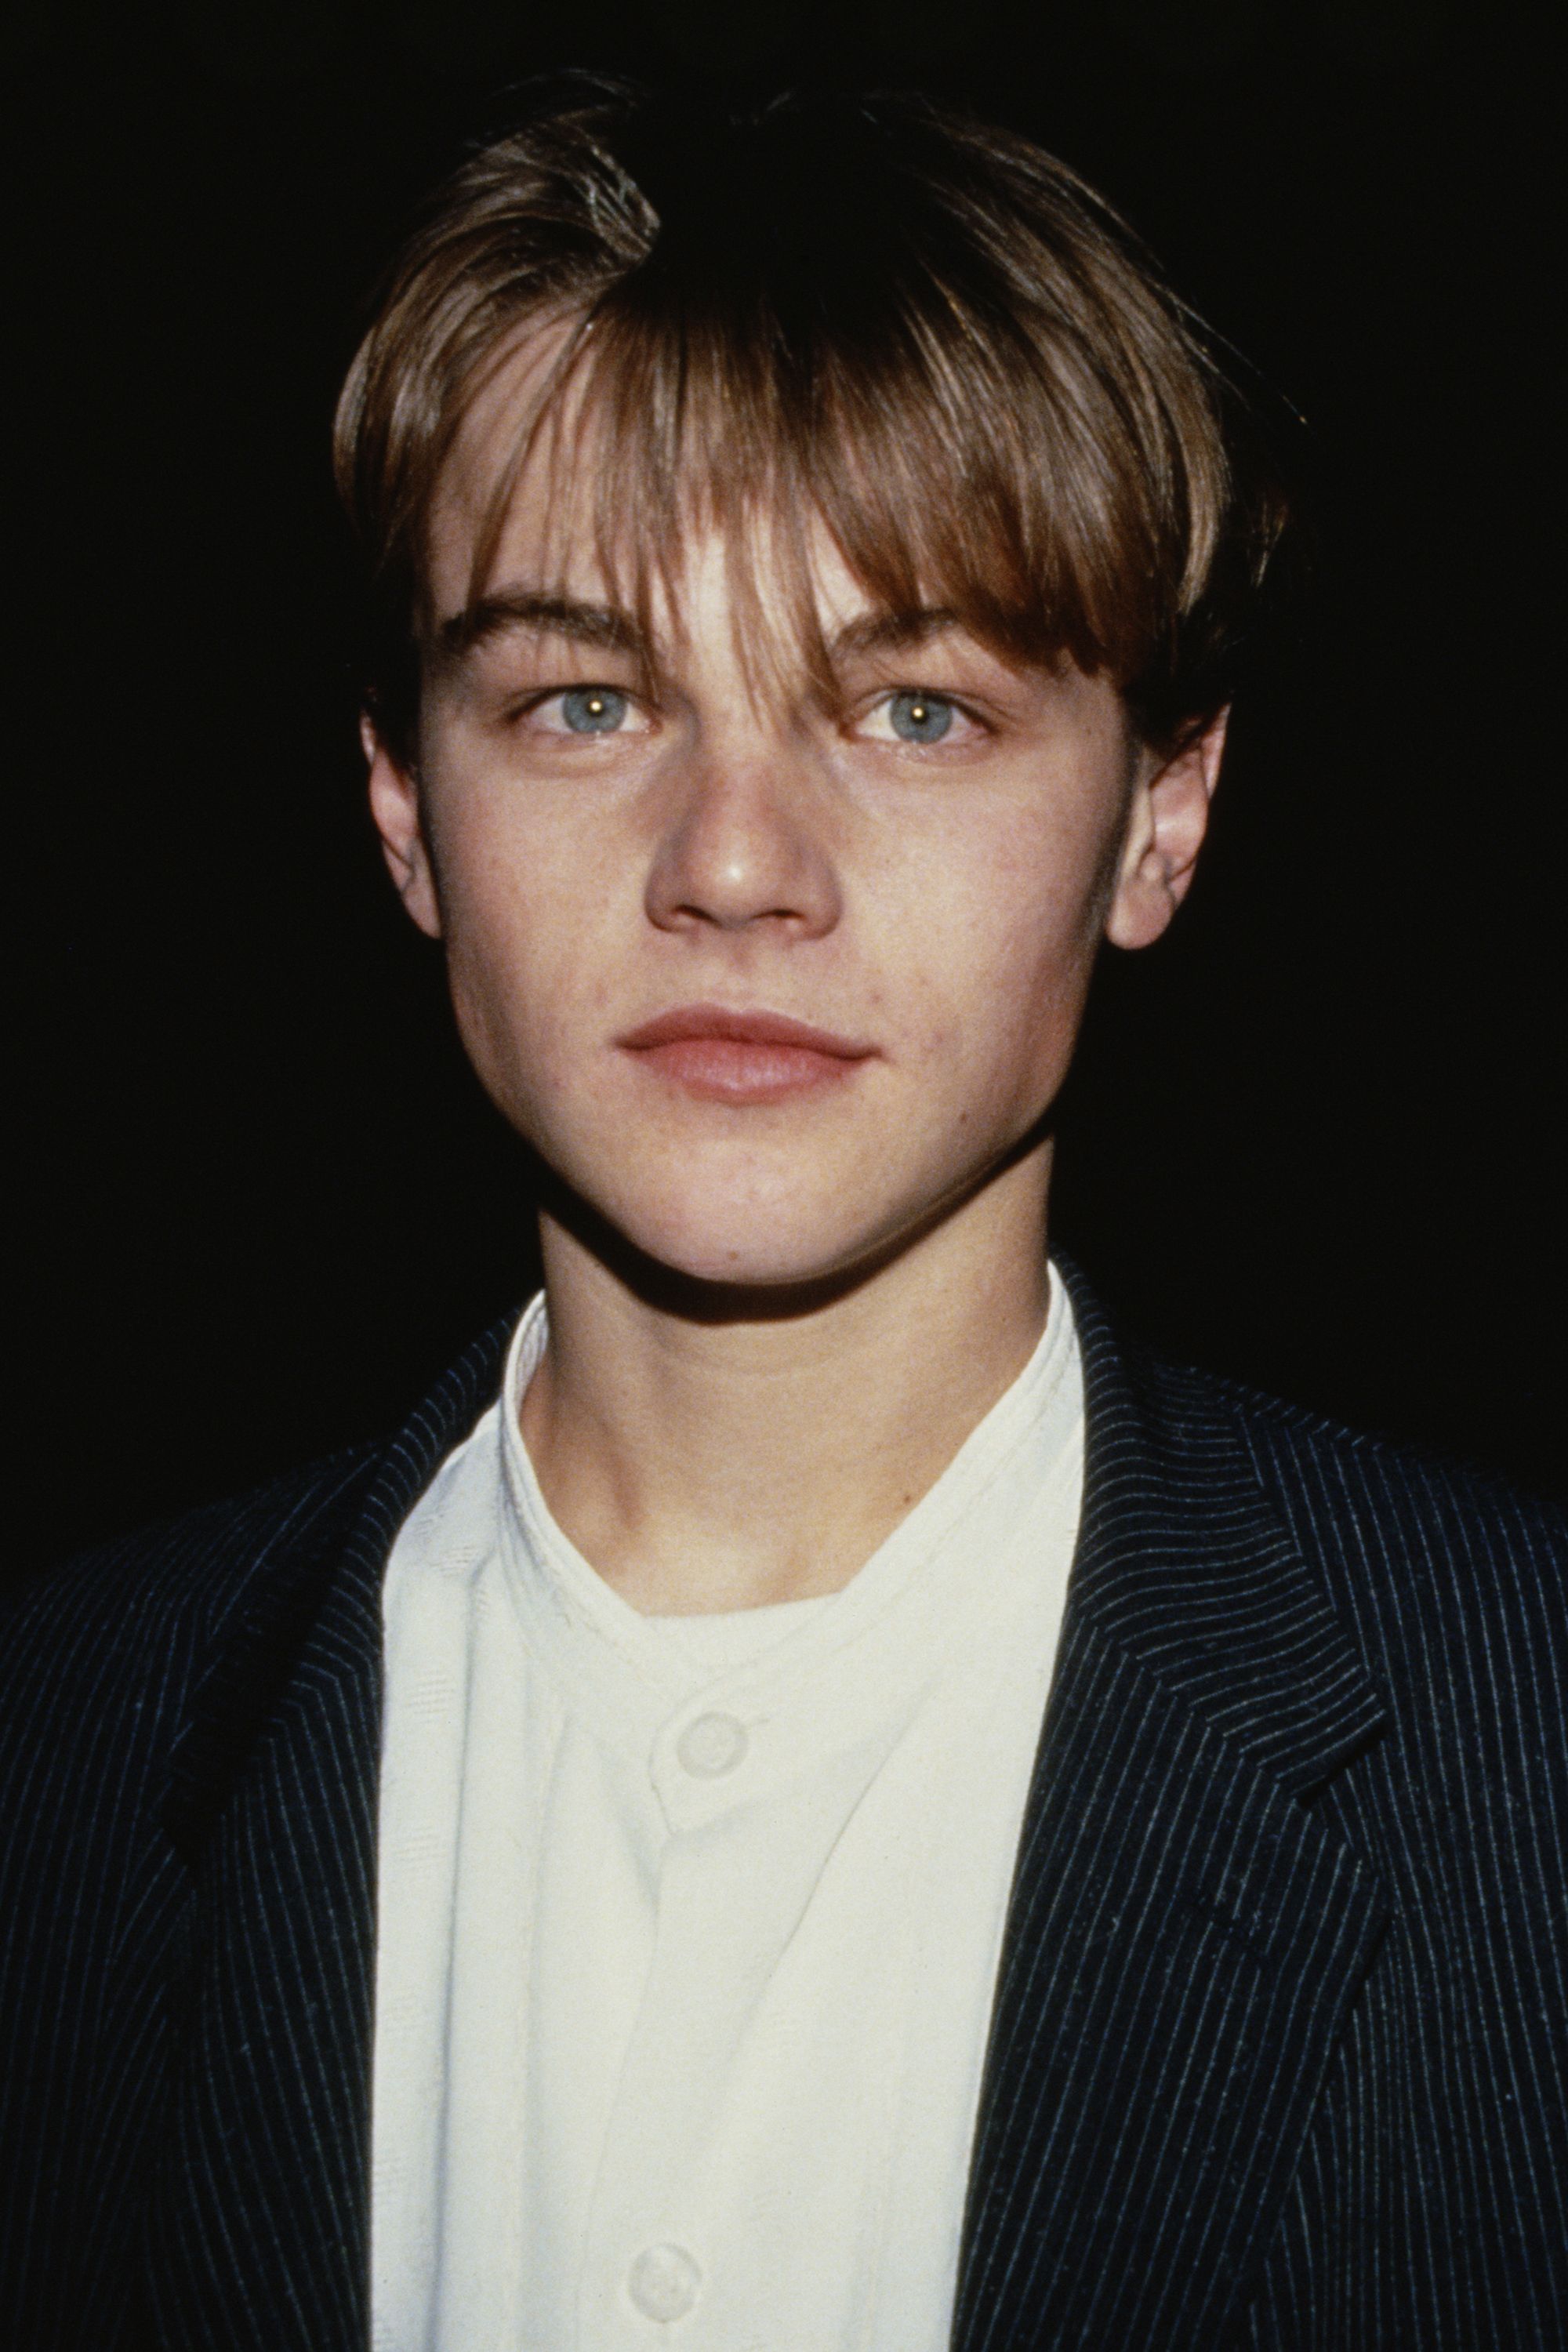 Leonardo DiCaprio Hairstyles Throughout The Years  Cool Mens Hair